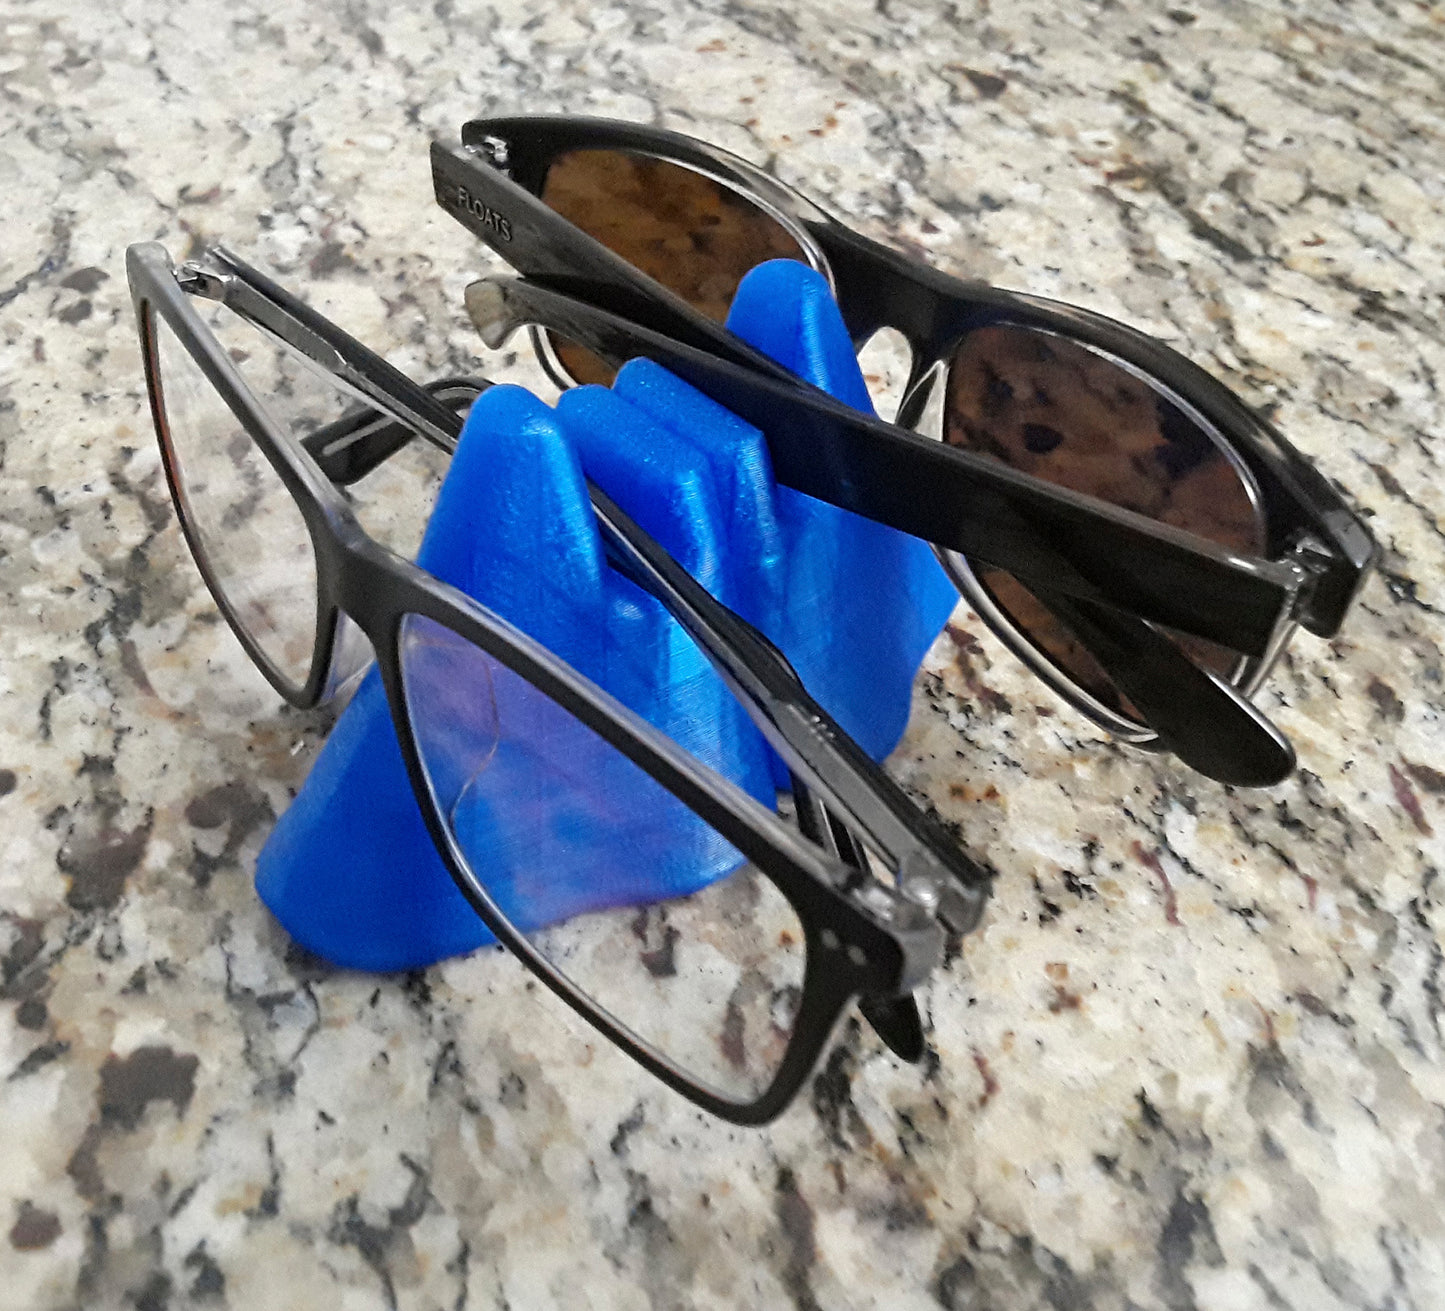 EYEGLASS STAND - Sunglasses & Eyeglasses Stand | Double Noses  (3D PRINTED)